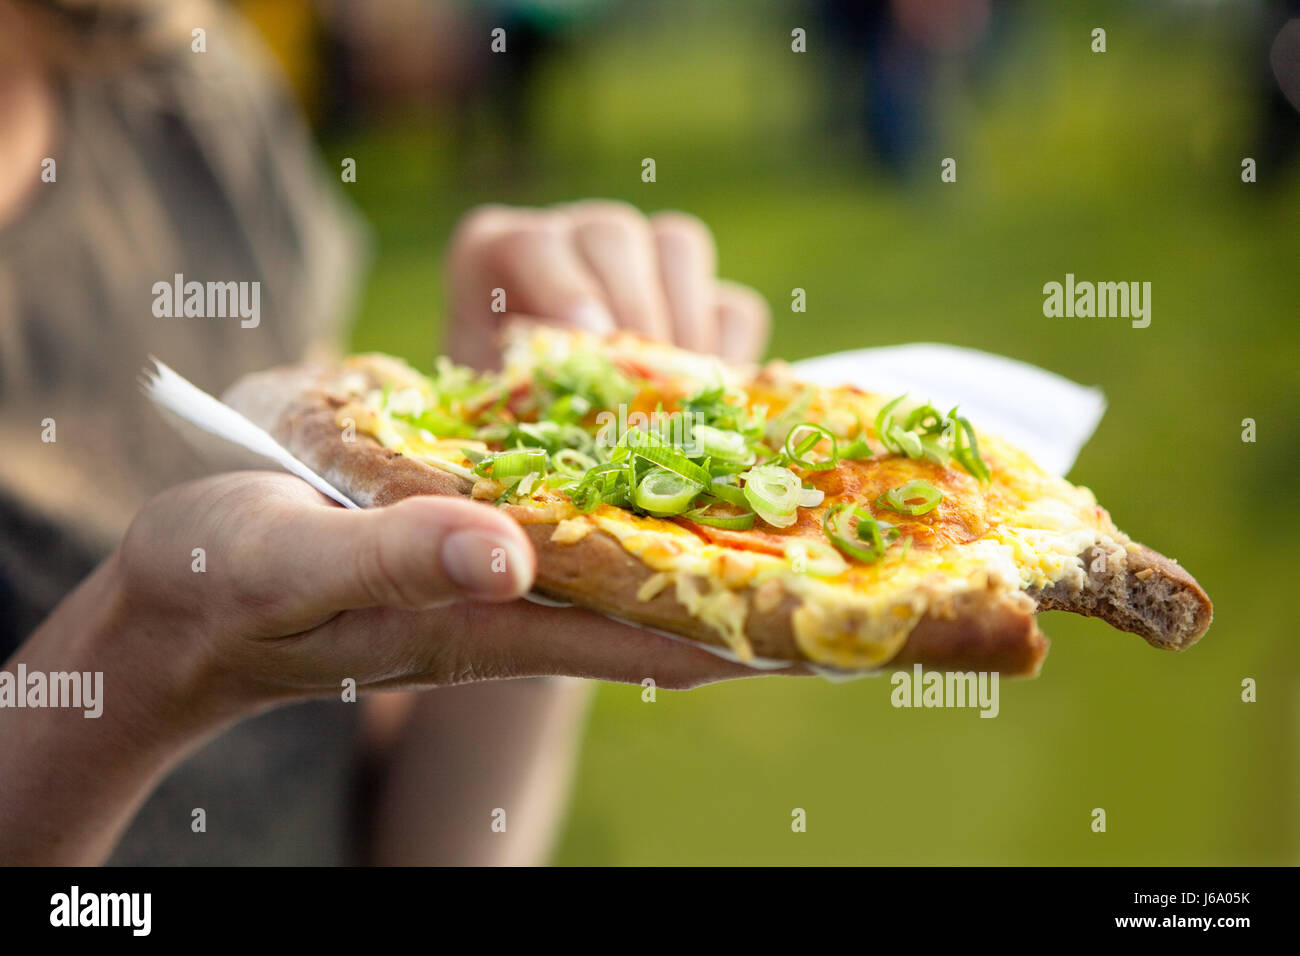 bread hand hot dainty pizza bite off hand green hunger taste hungry vegetable Stock Photo